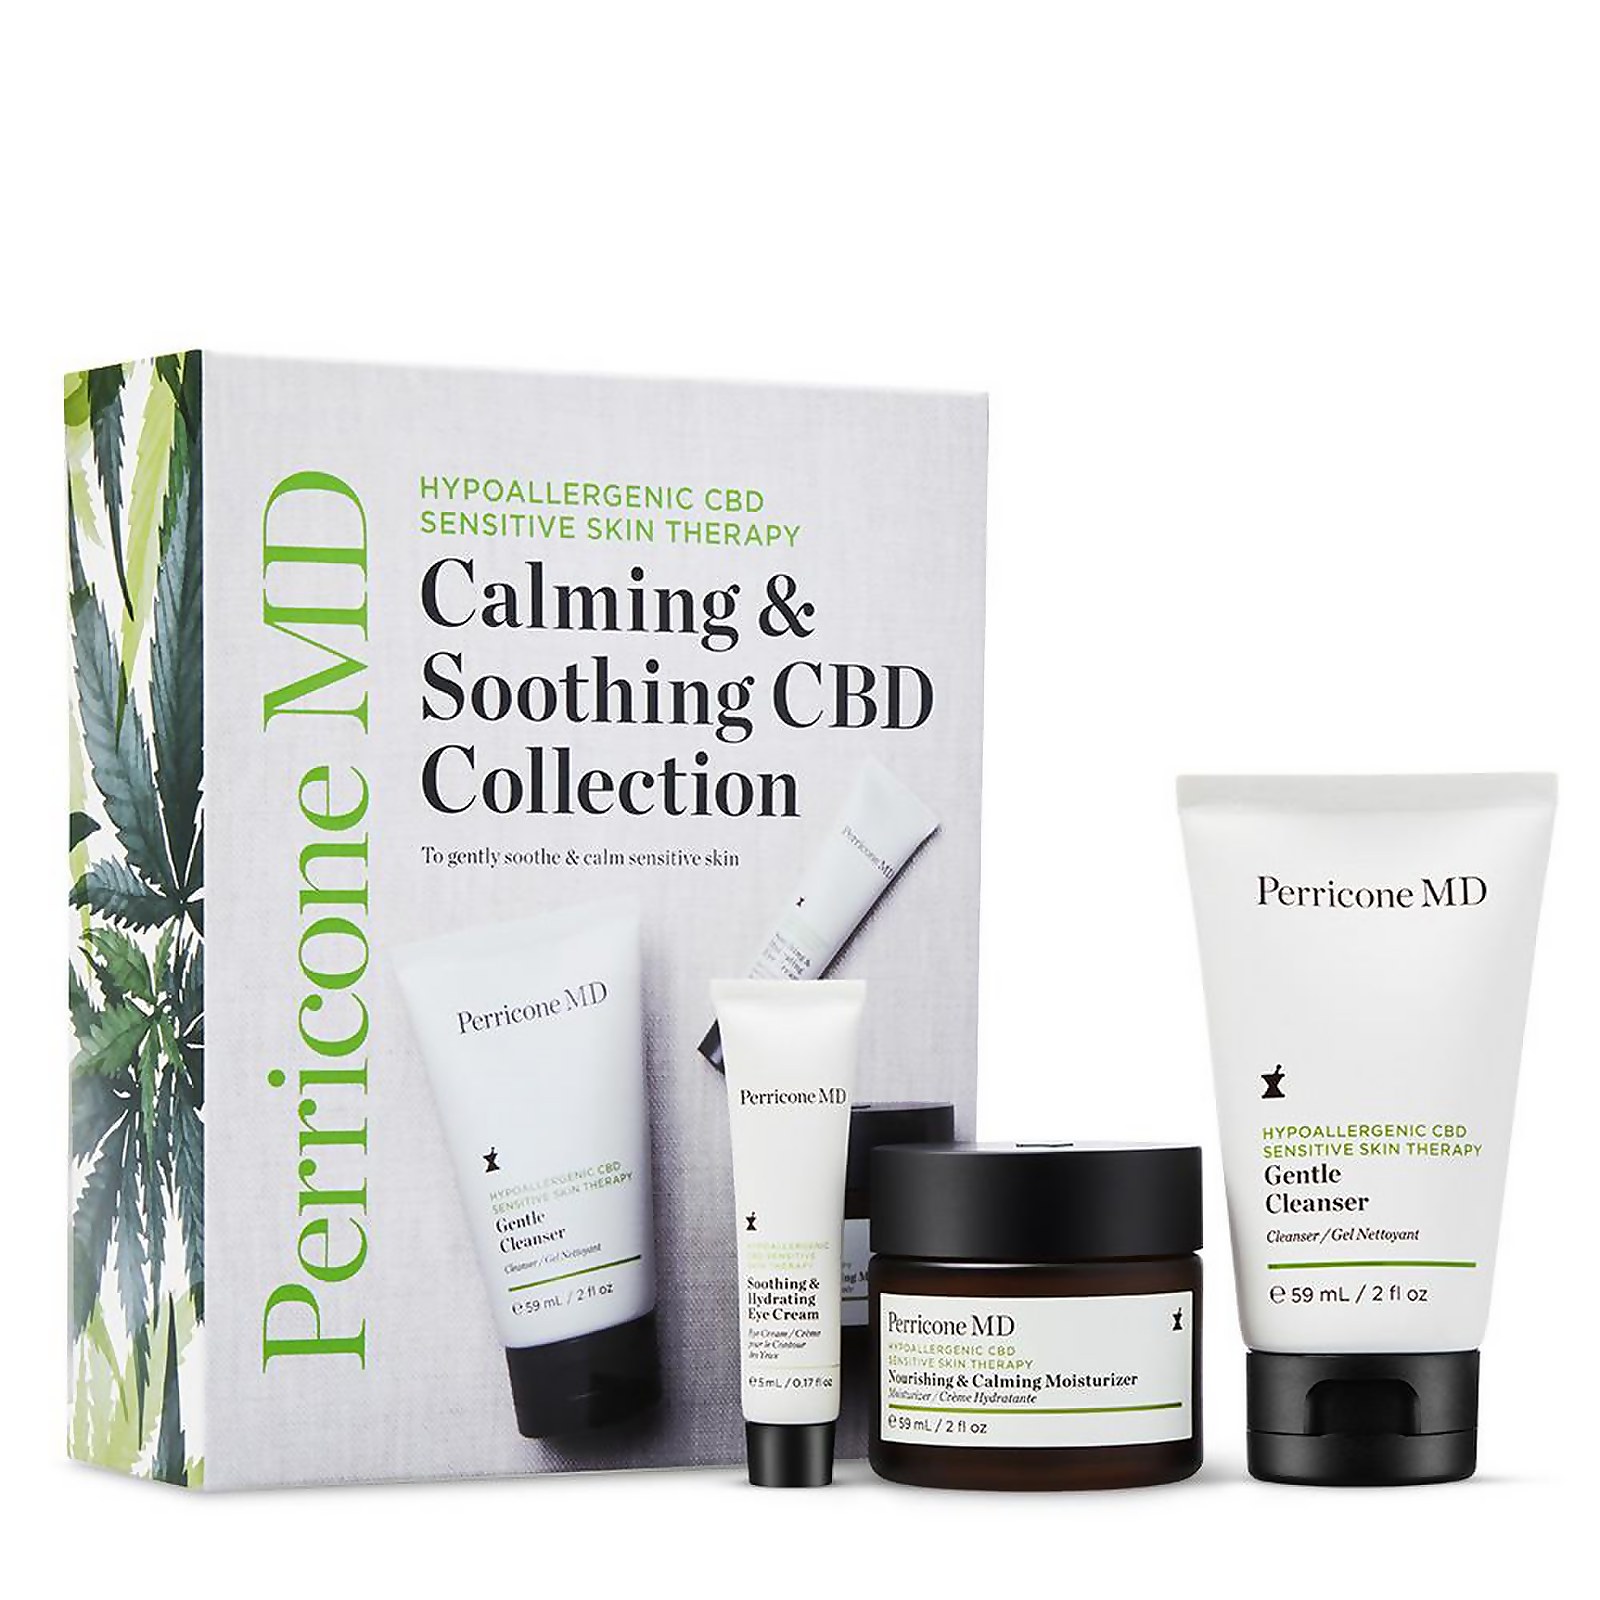 PERRICONE MD CALMING & SOOTHING CBD COLLECTION,7831